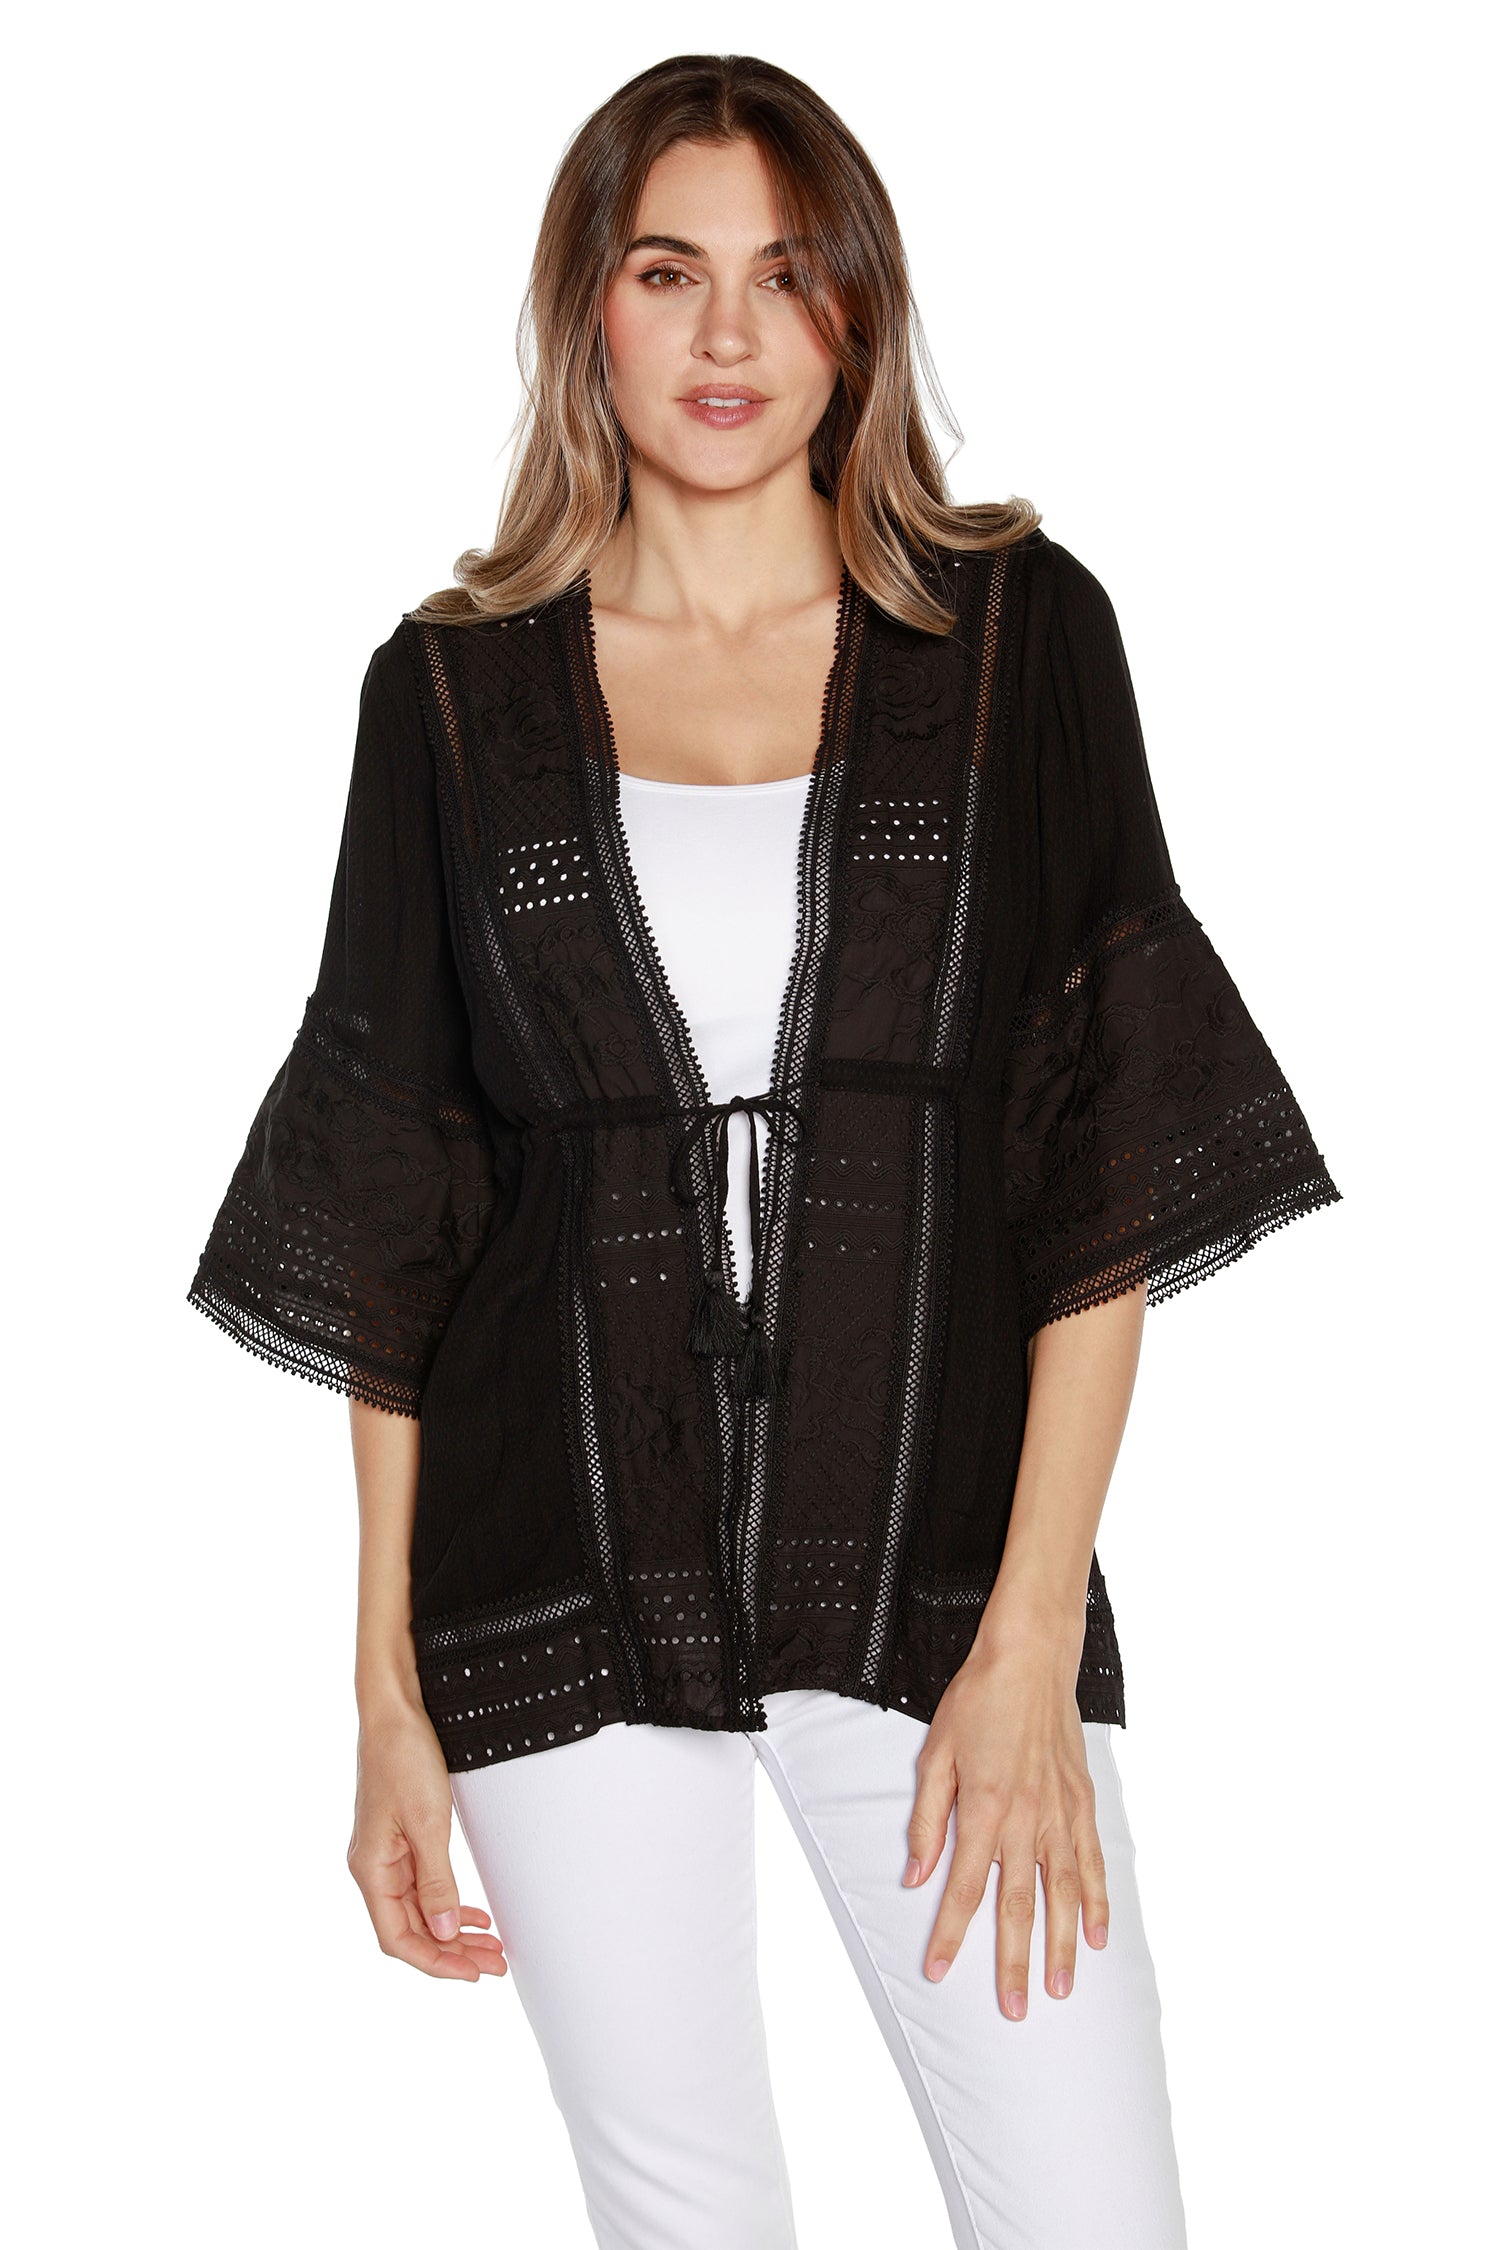 Women's Cotton Kimono with Eyelet Lace and Embroidery